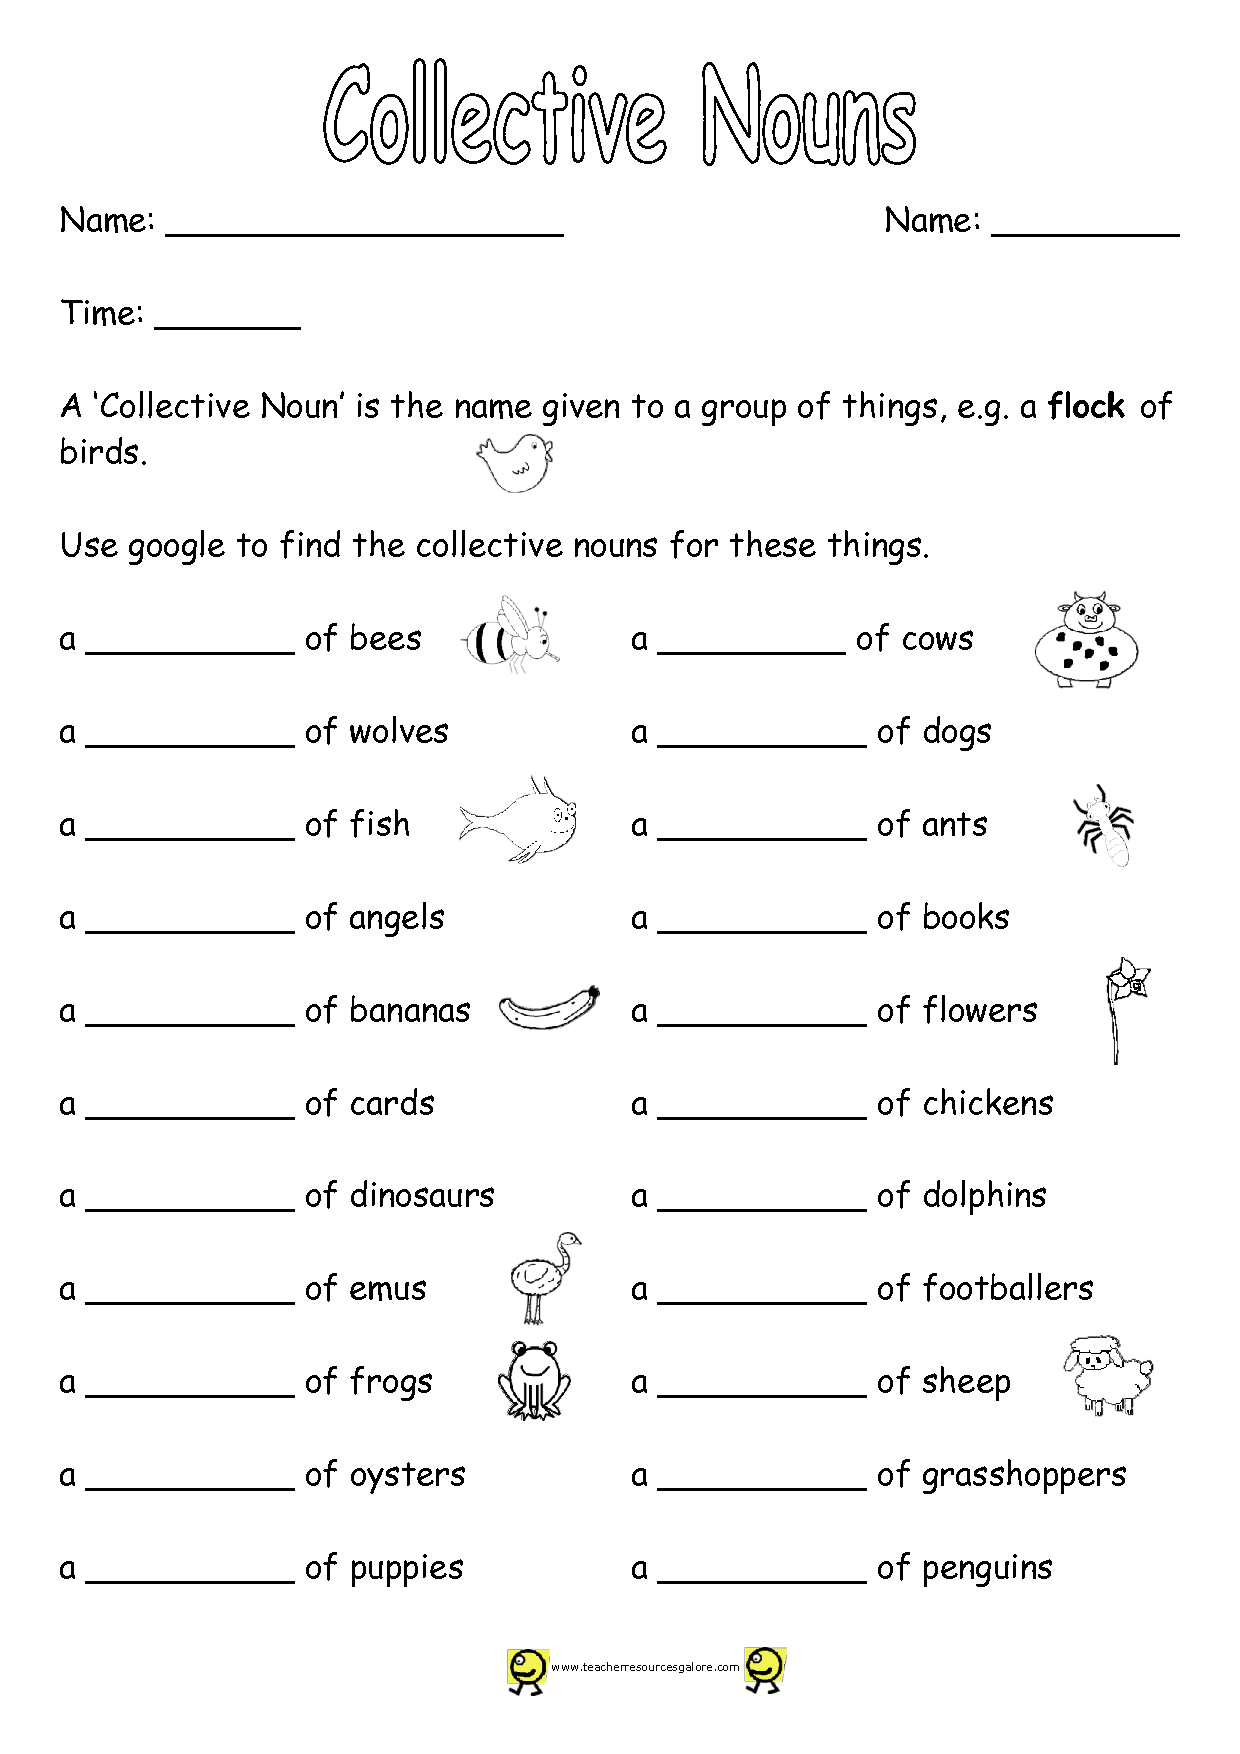 Common Collective Nouns Worksheets